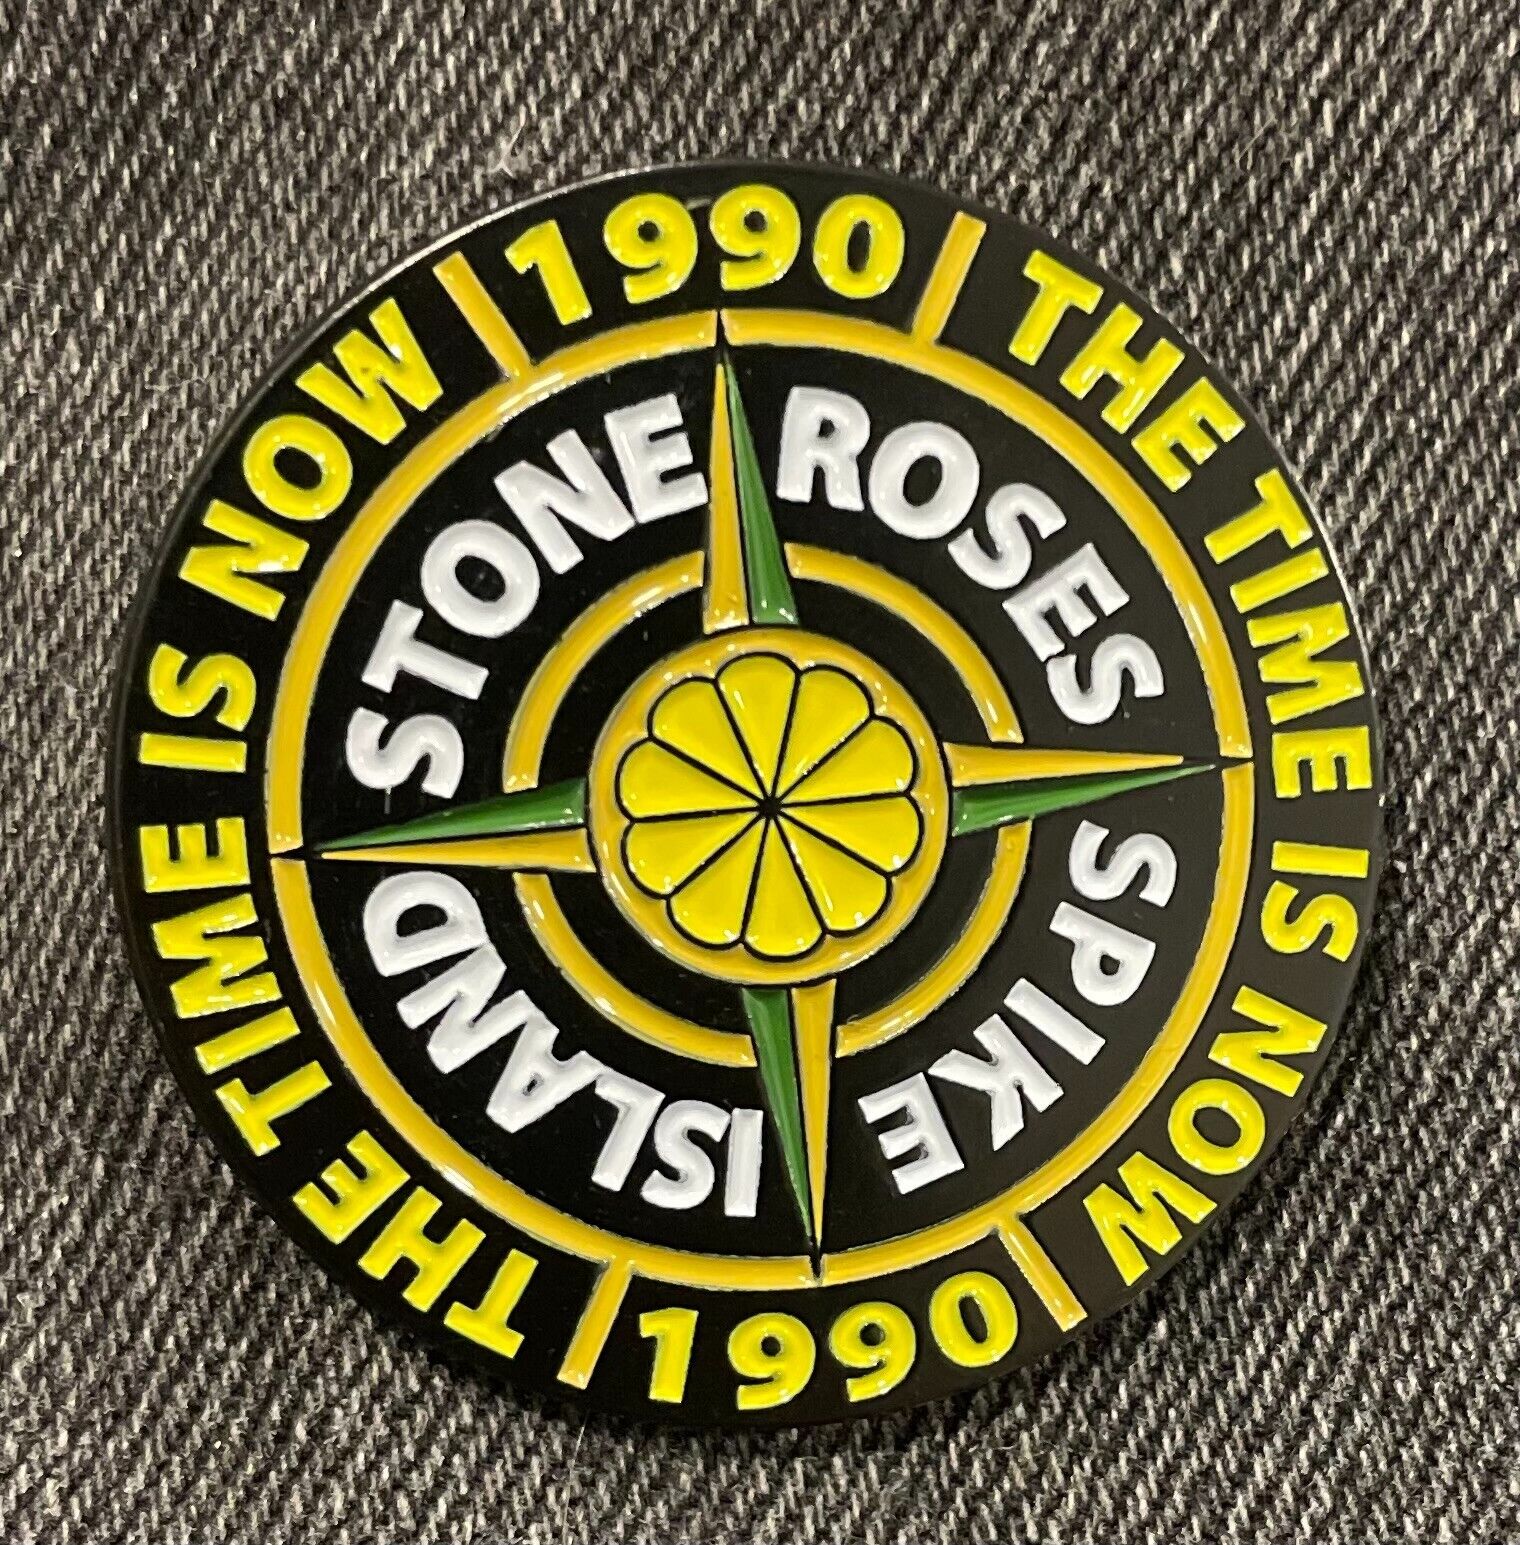 The Stone Roses - The Time Is Now - Spike - Madchester - Britpop - Enamel Pin